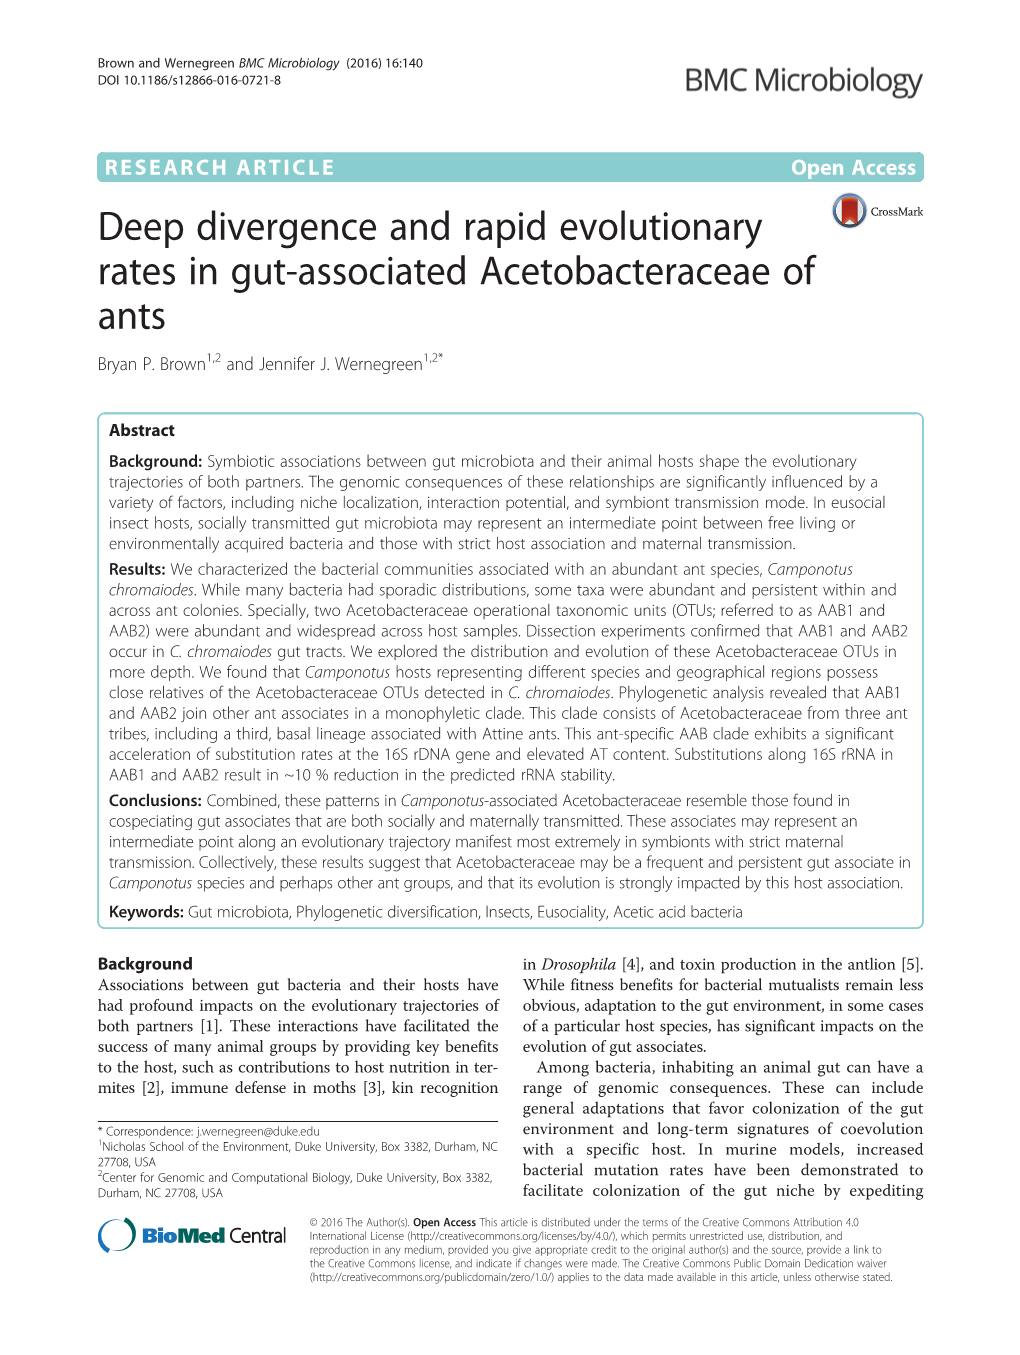 Deep Divergence and Rapid Evolutionary Rates in Gut-Associated Acetobacteraceae of Ants Bryan P